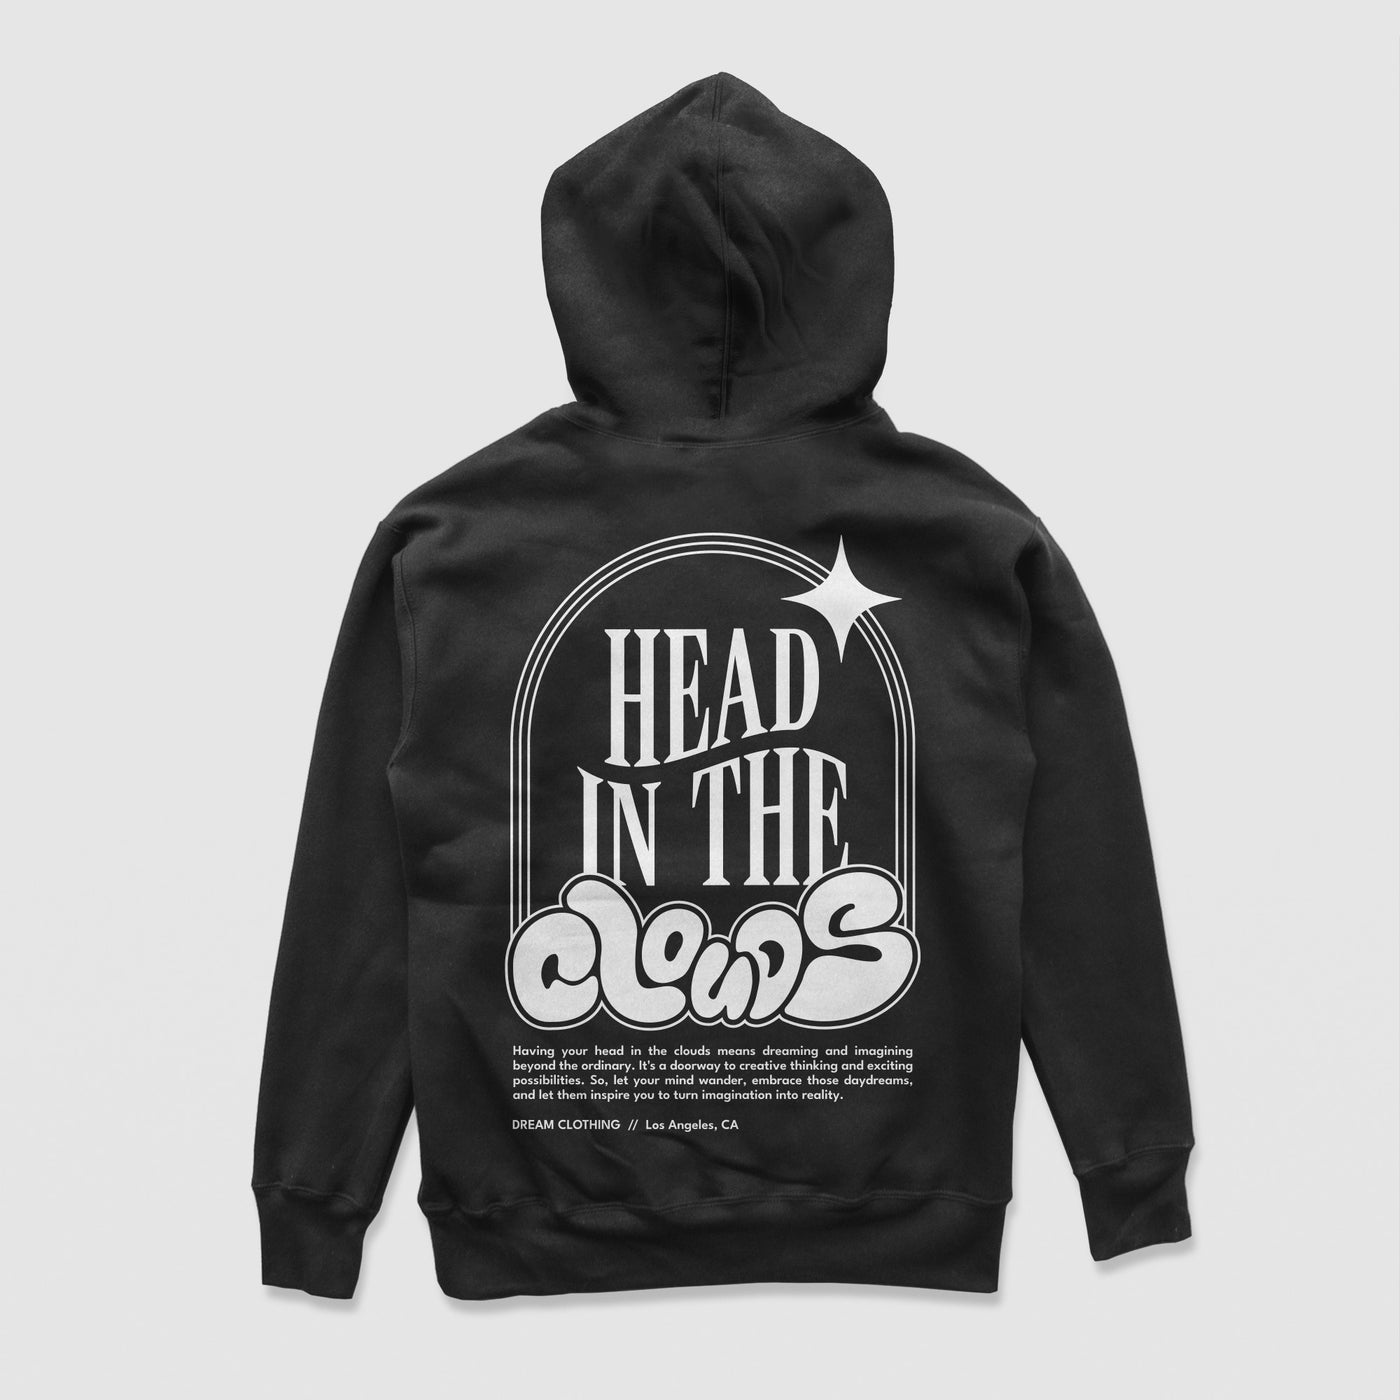 Head In The Clouds HoodieIntroducing "Head In The Clouds," a design that captures the essence of daydreaming with a unique, darker twist. Designed for those who seek an escape from the disapDREAM Clothing 